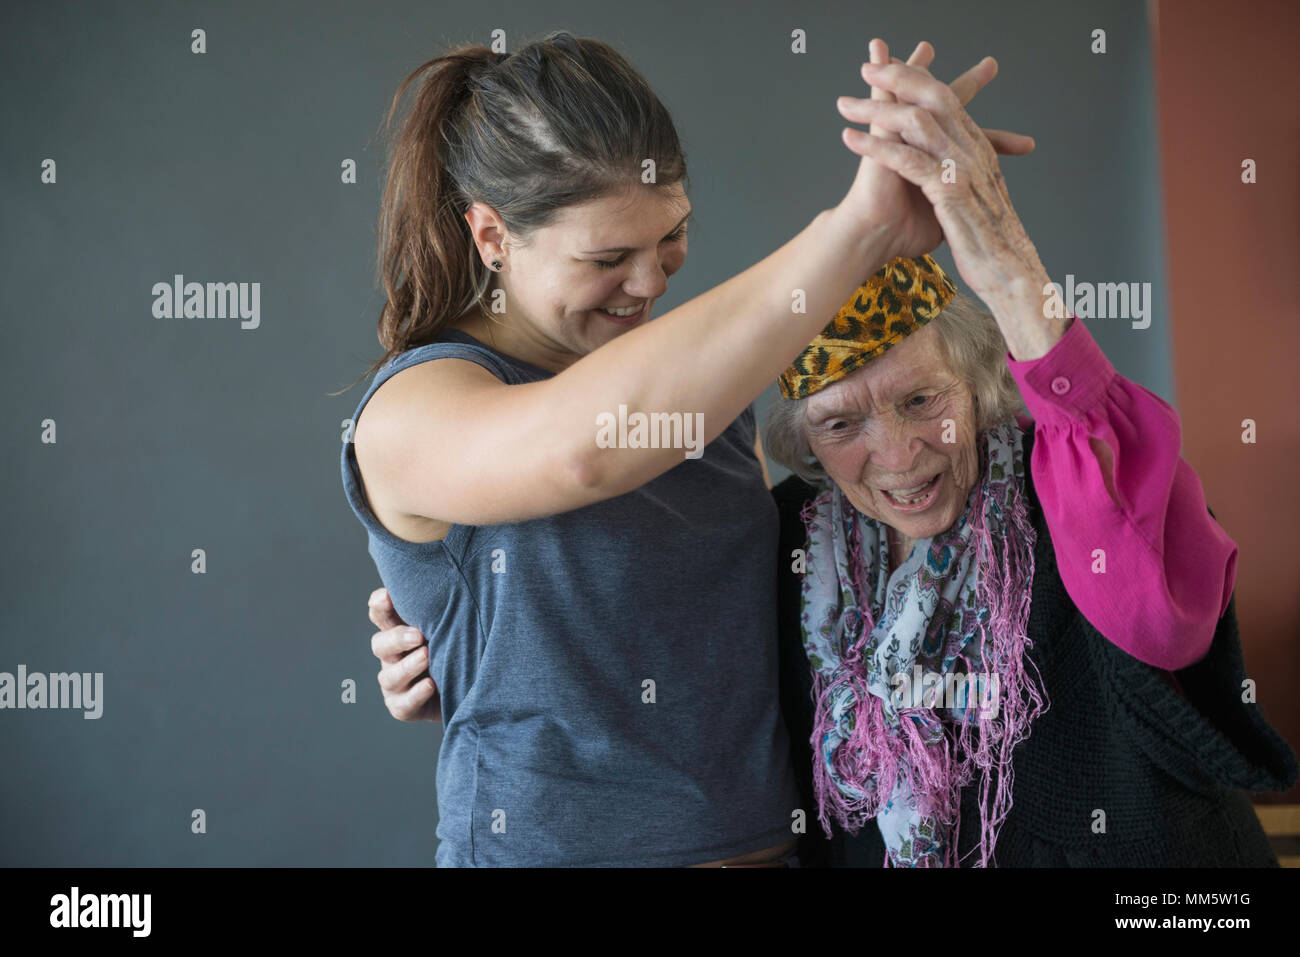 Grandmother and granddaughter dancing together Stock Photo